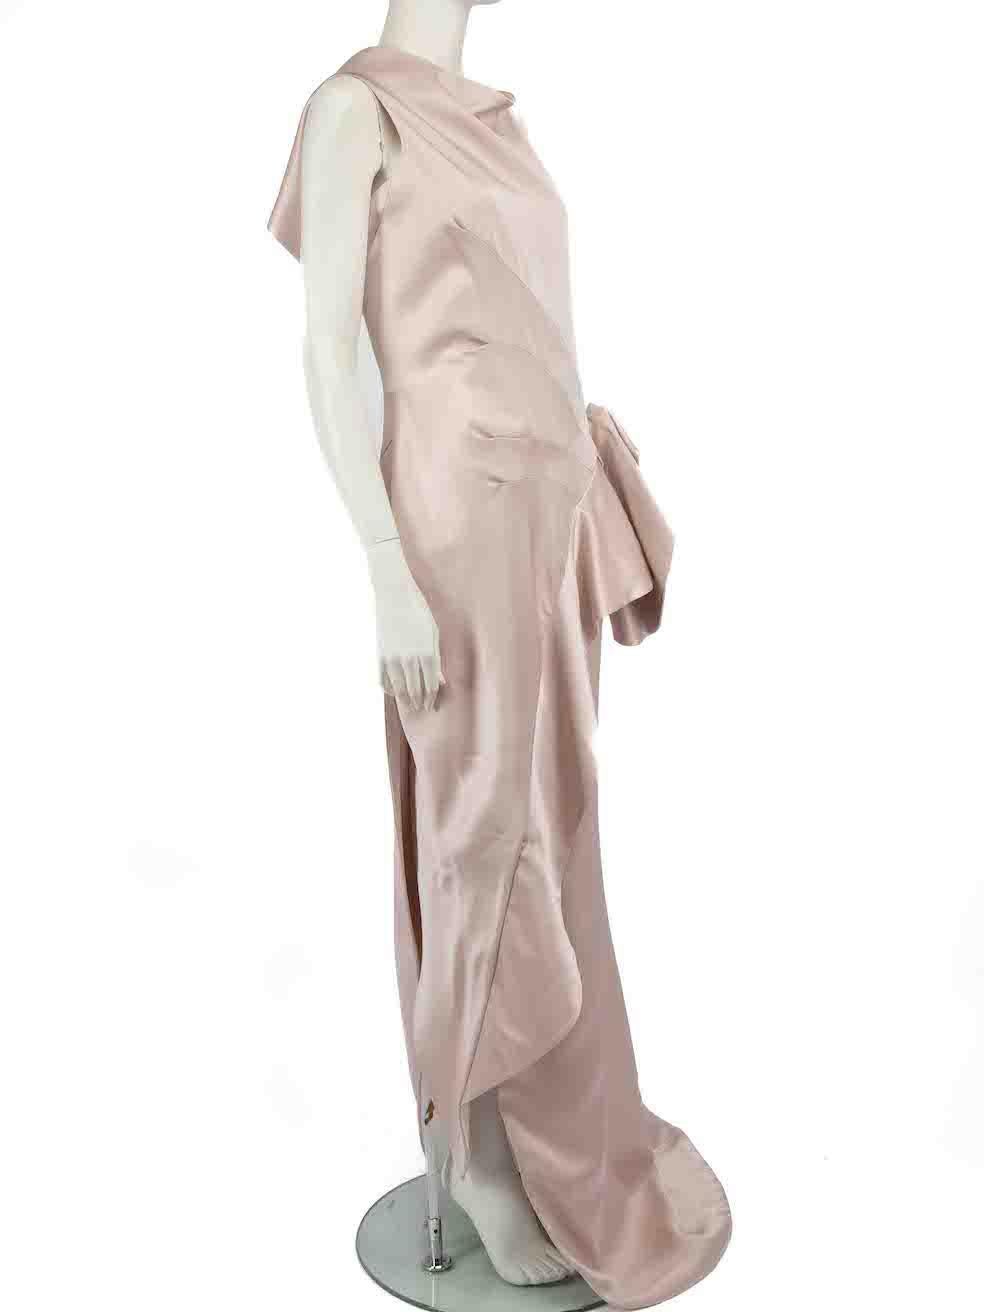 CONDITION is Never worn. No visible wear to dress is evident on this new Maticevski designer resale item.
 
 
 
 Details
 
 
 SS19
 
 Pink
 
 Synthetic
 
 Gown
 
 Asymmetric hem
 
 Sleeveless
 
 Cowl neck
 
 Back zip fastening
 
 Ruffle detail
 
